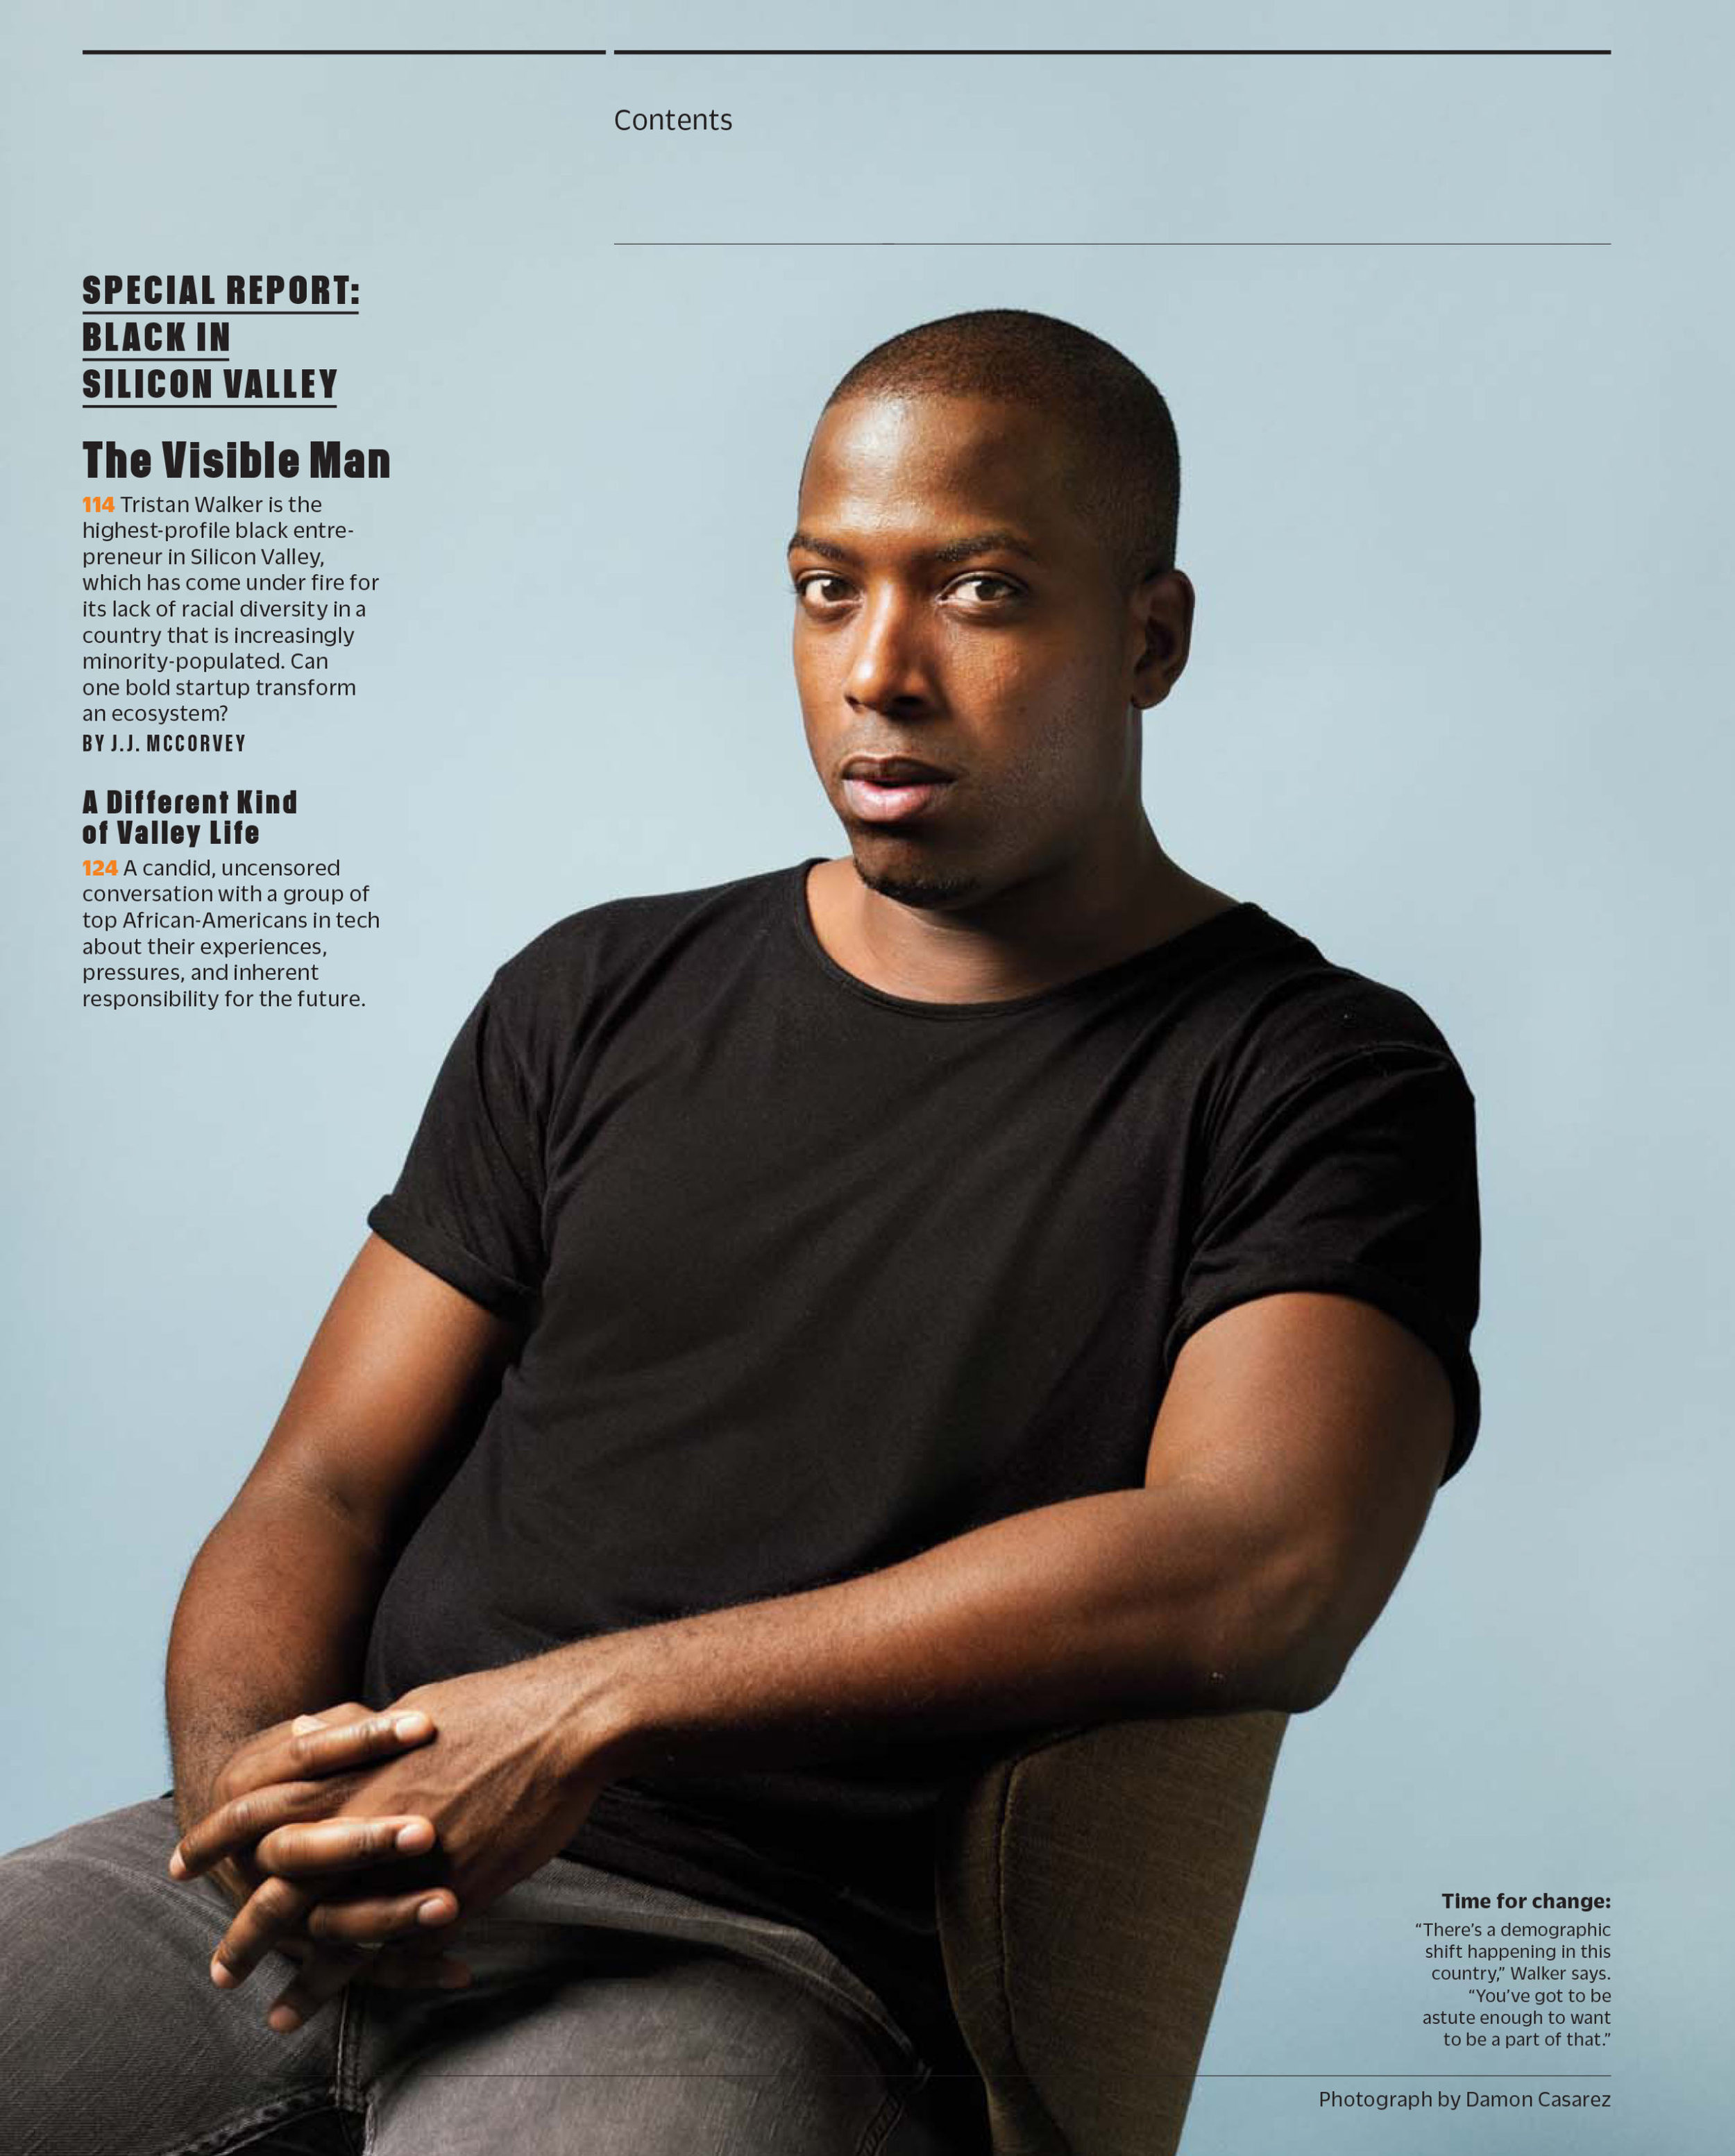   Profile on Tristan Walker, an African-American entrepreneur known for being the head of business development at Foursquare and an advocate for racial diversity in the Silicon Valley Tech world. Now he's focusing on his start-up Walker and Co., whic